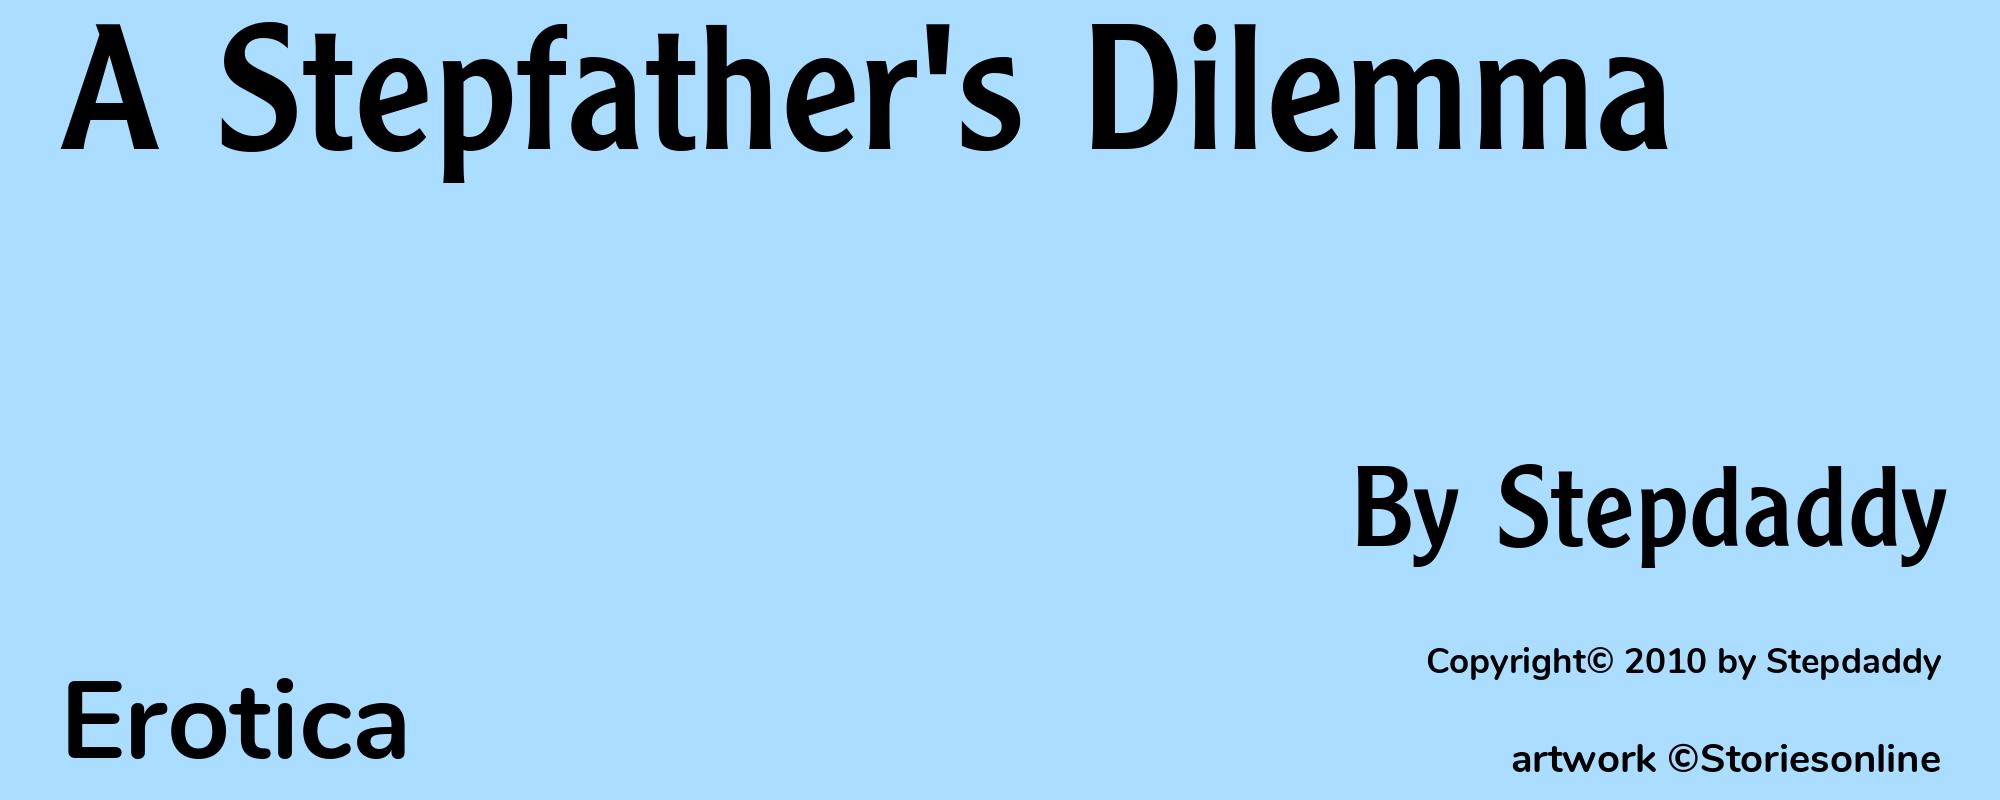 A Stepfather's Dilemma - Cover